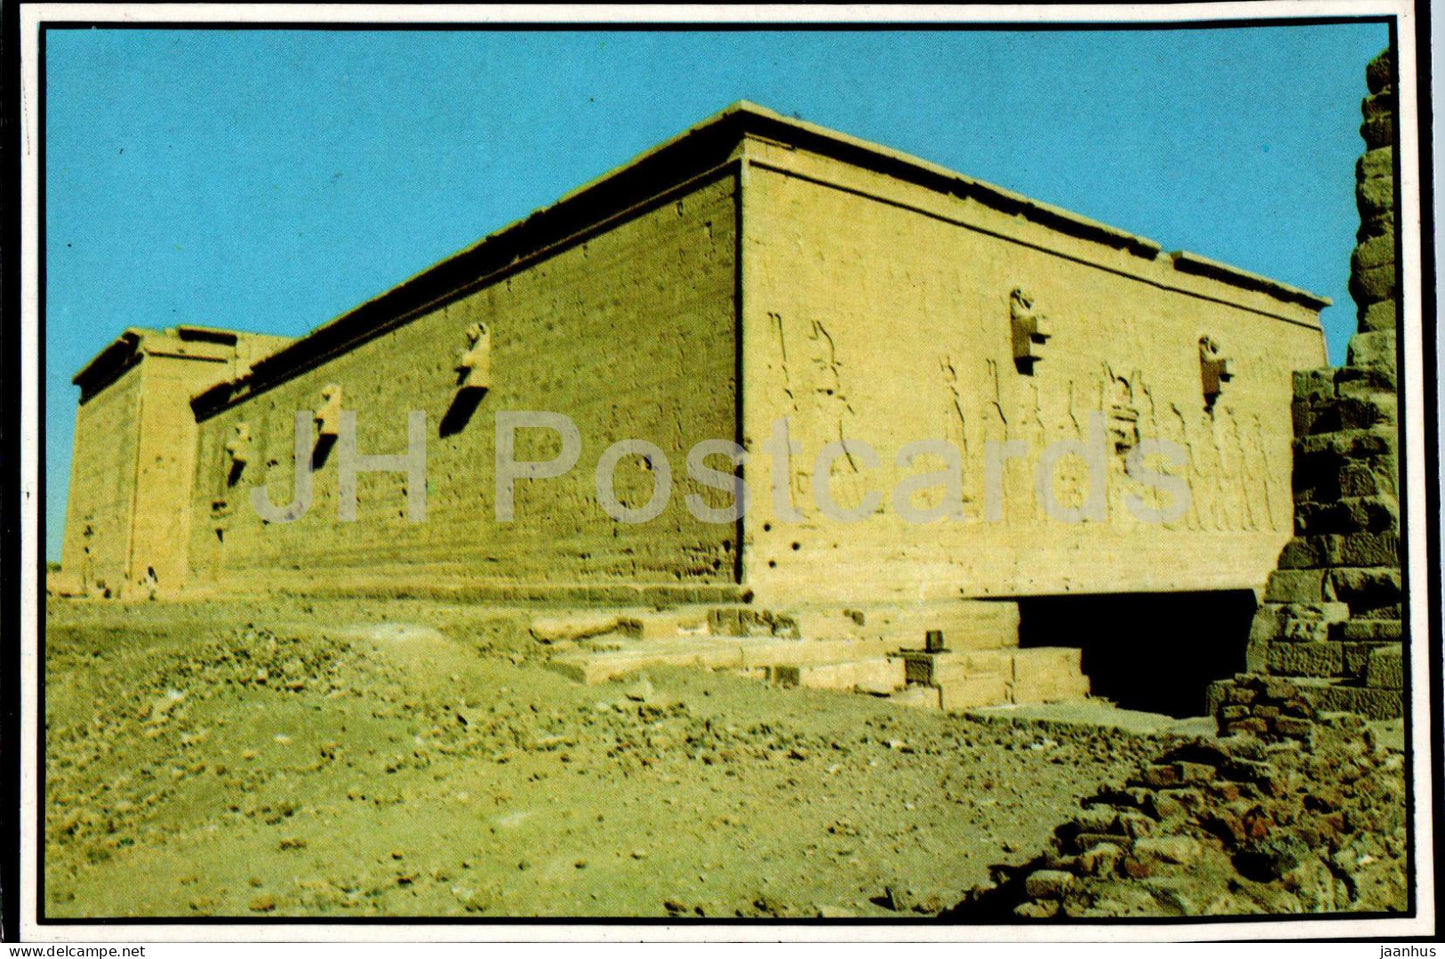 Dendera - Reliefs of Hator Temple - ancient world - Egypt - unused - JH Postcards